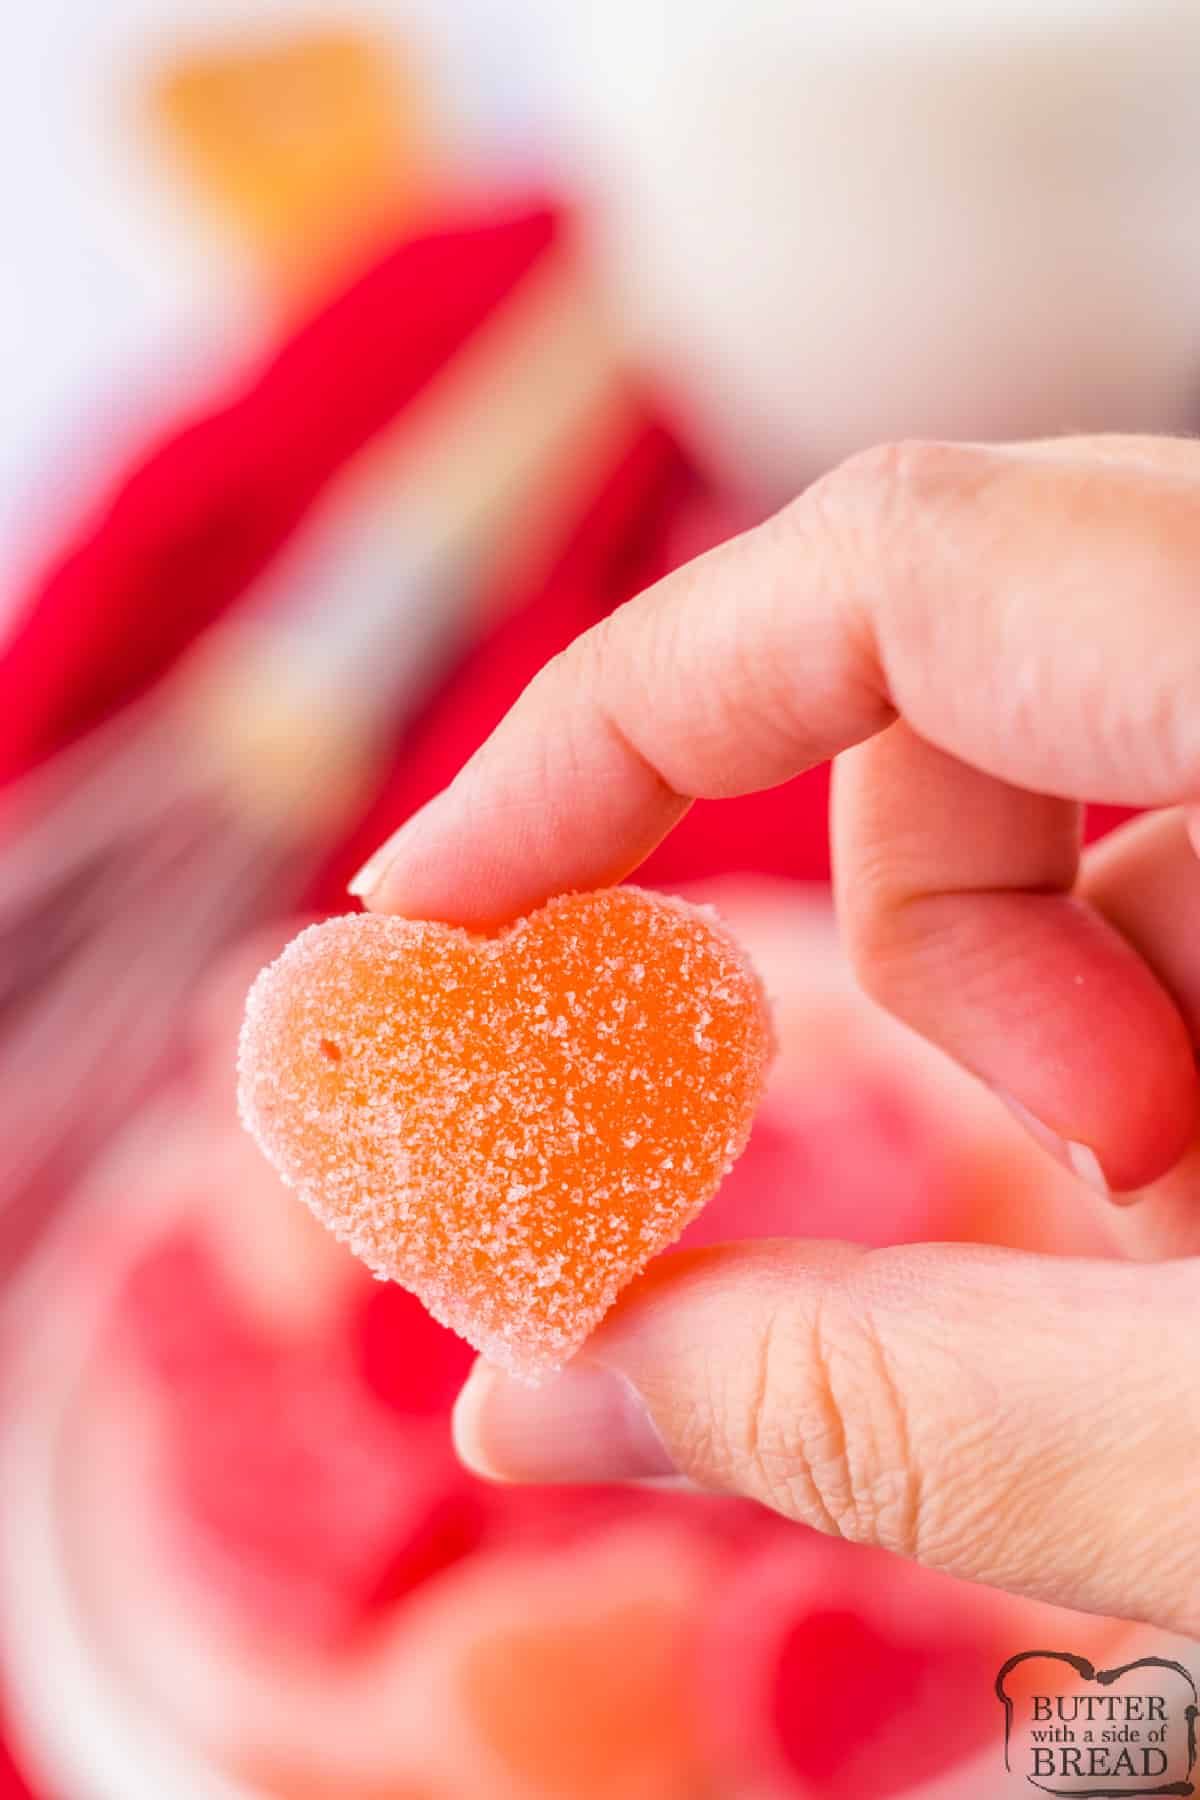 Gummy candy with sweet and sour sugar coating. 